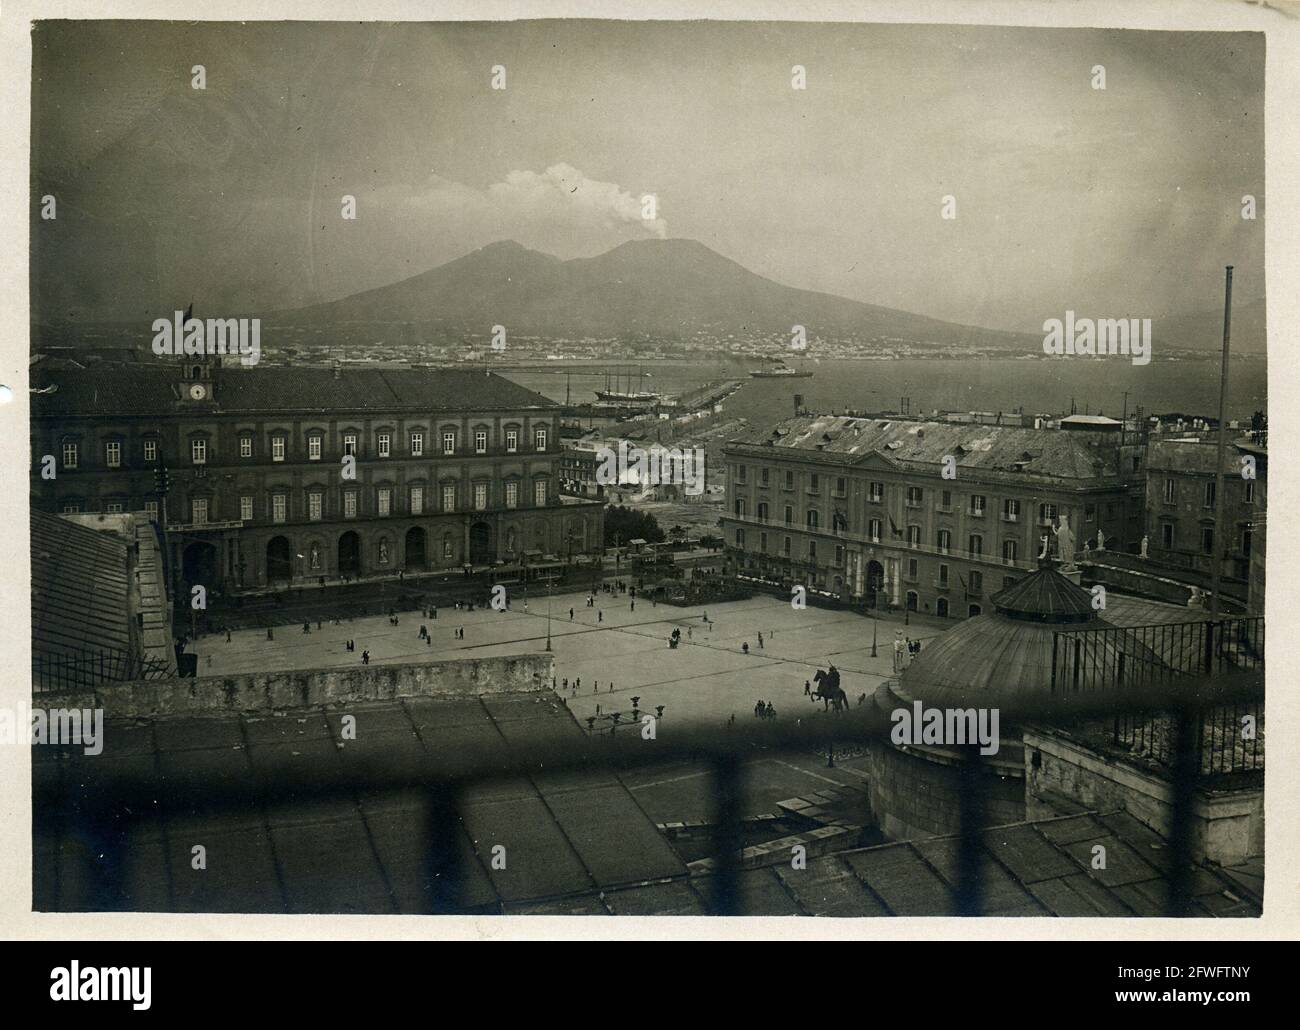 1944, NAPLES, ITALY: The eruption of MOUNT VESUVIUS, from 18 to 24 march, during the occupation of U.S. Force. Photo taken by Plebiscito square Stock Photo